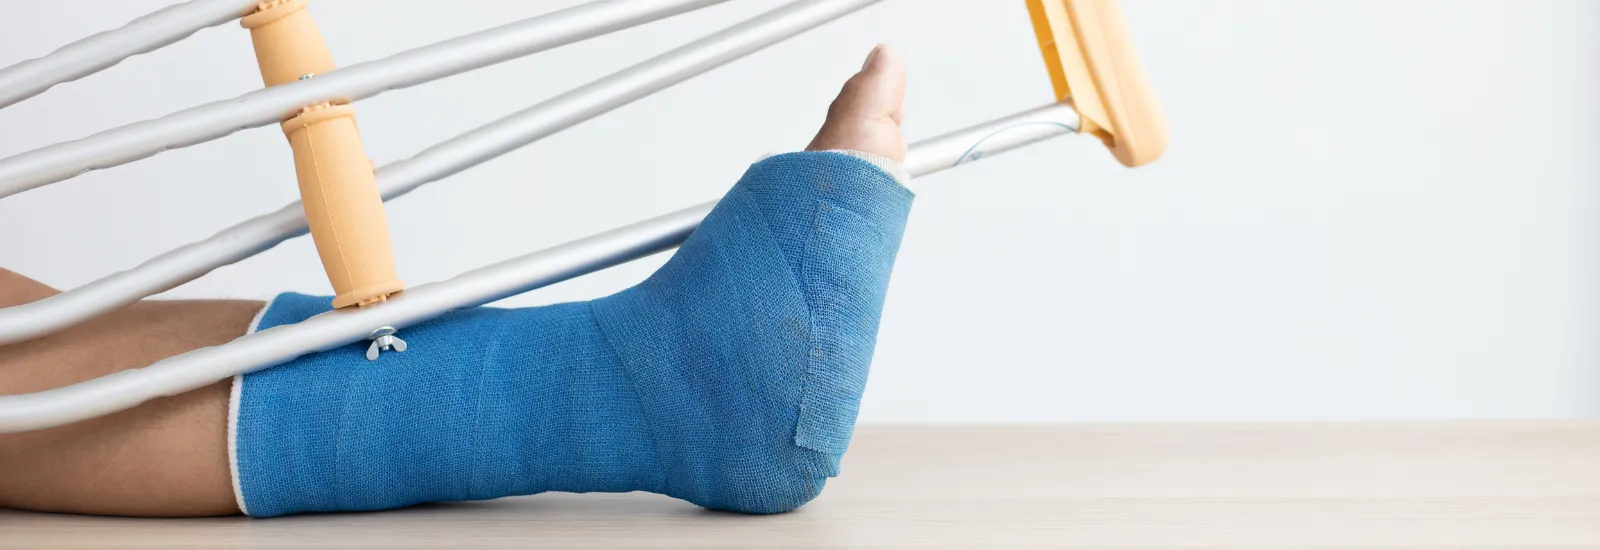 New in a Plaster Cast? Advice On How To Speed Up Recovery